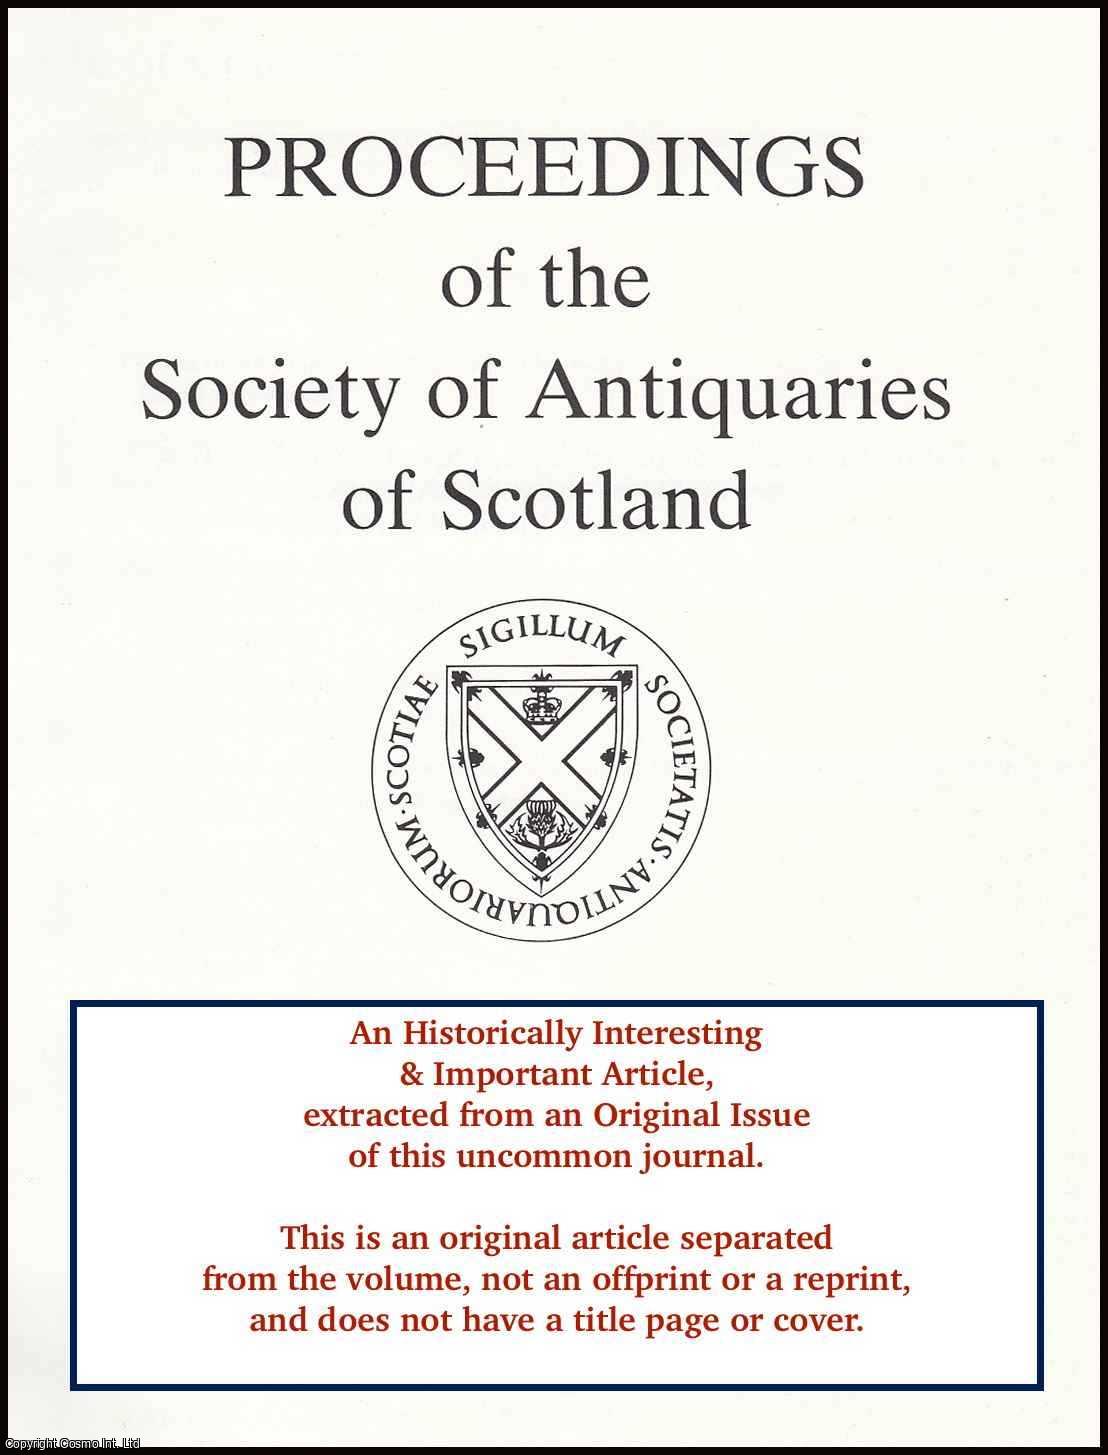 Alastair R. Rees, C. McGill, A. MacSween & L. N. Sinfield - A First Millenium AD Cemetery, Rectangular Bronze Age Structure and Late Prehistoric Settlement at Thornybank, Midlothian. An original article from the Proceedings of the Society of Antiquaries of Scotland, 2002.